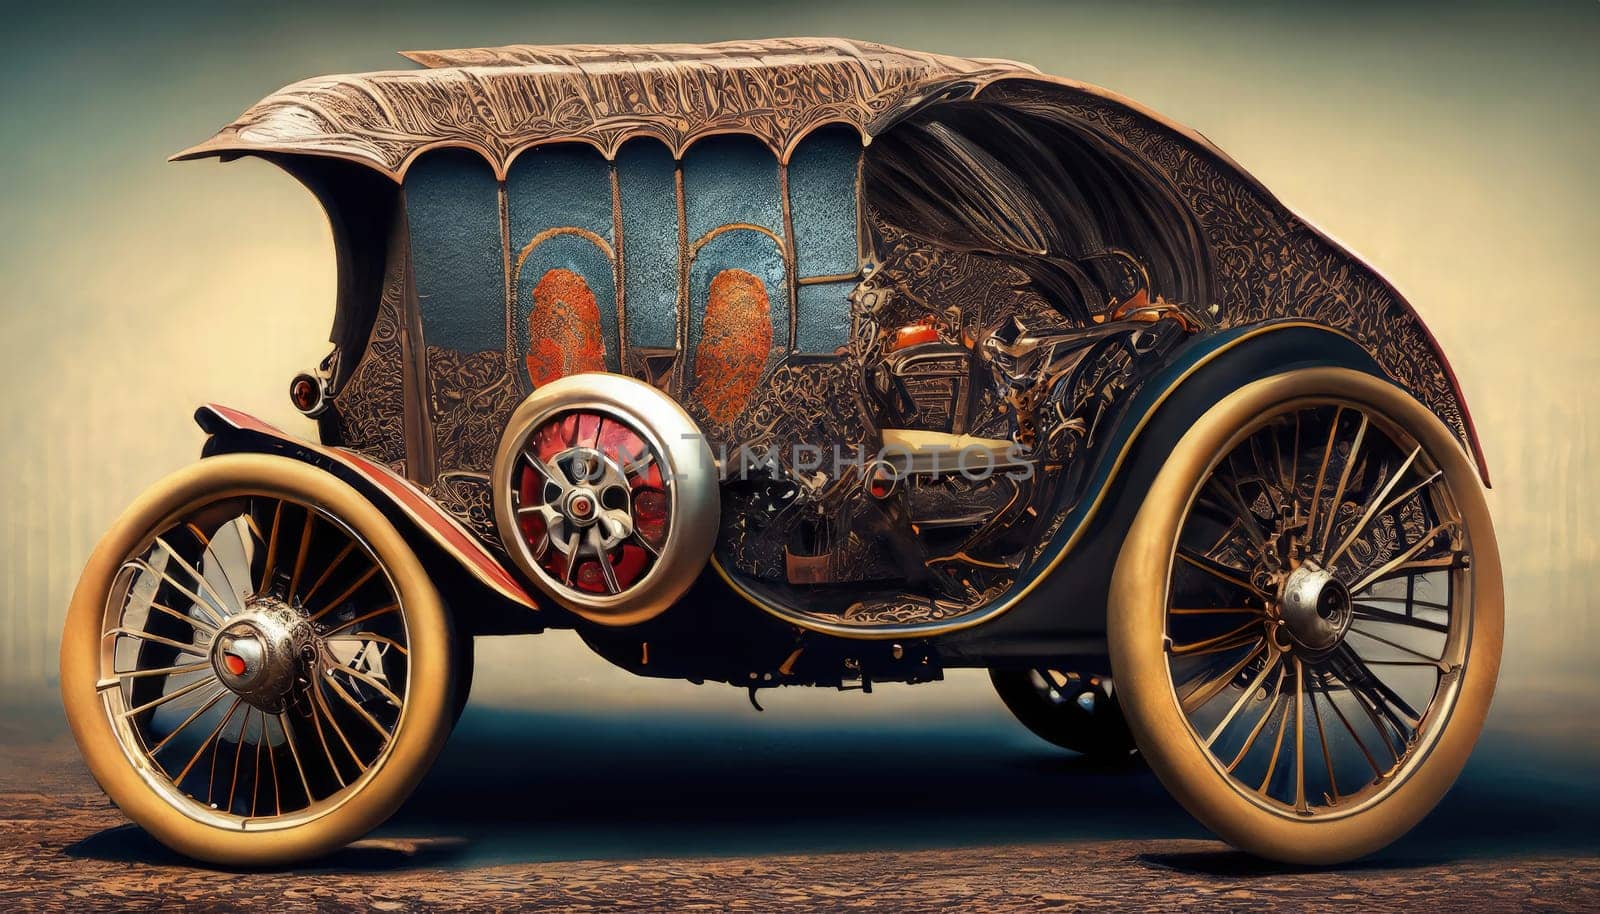 Vintage car model on a wooden background. 3d illustration. by Waseem-Creations